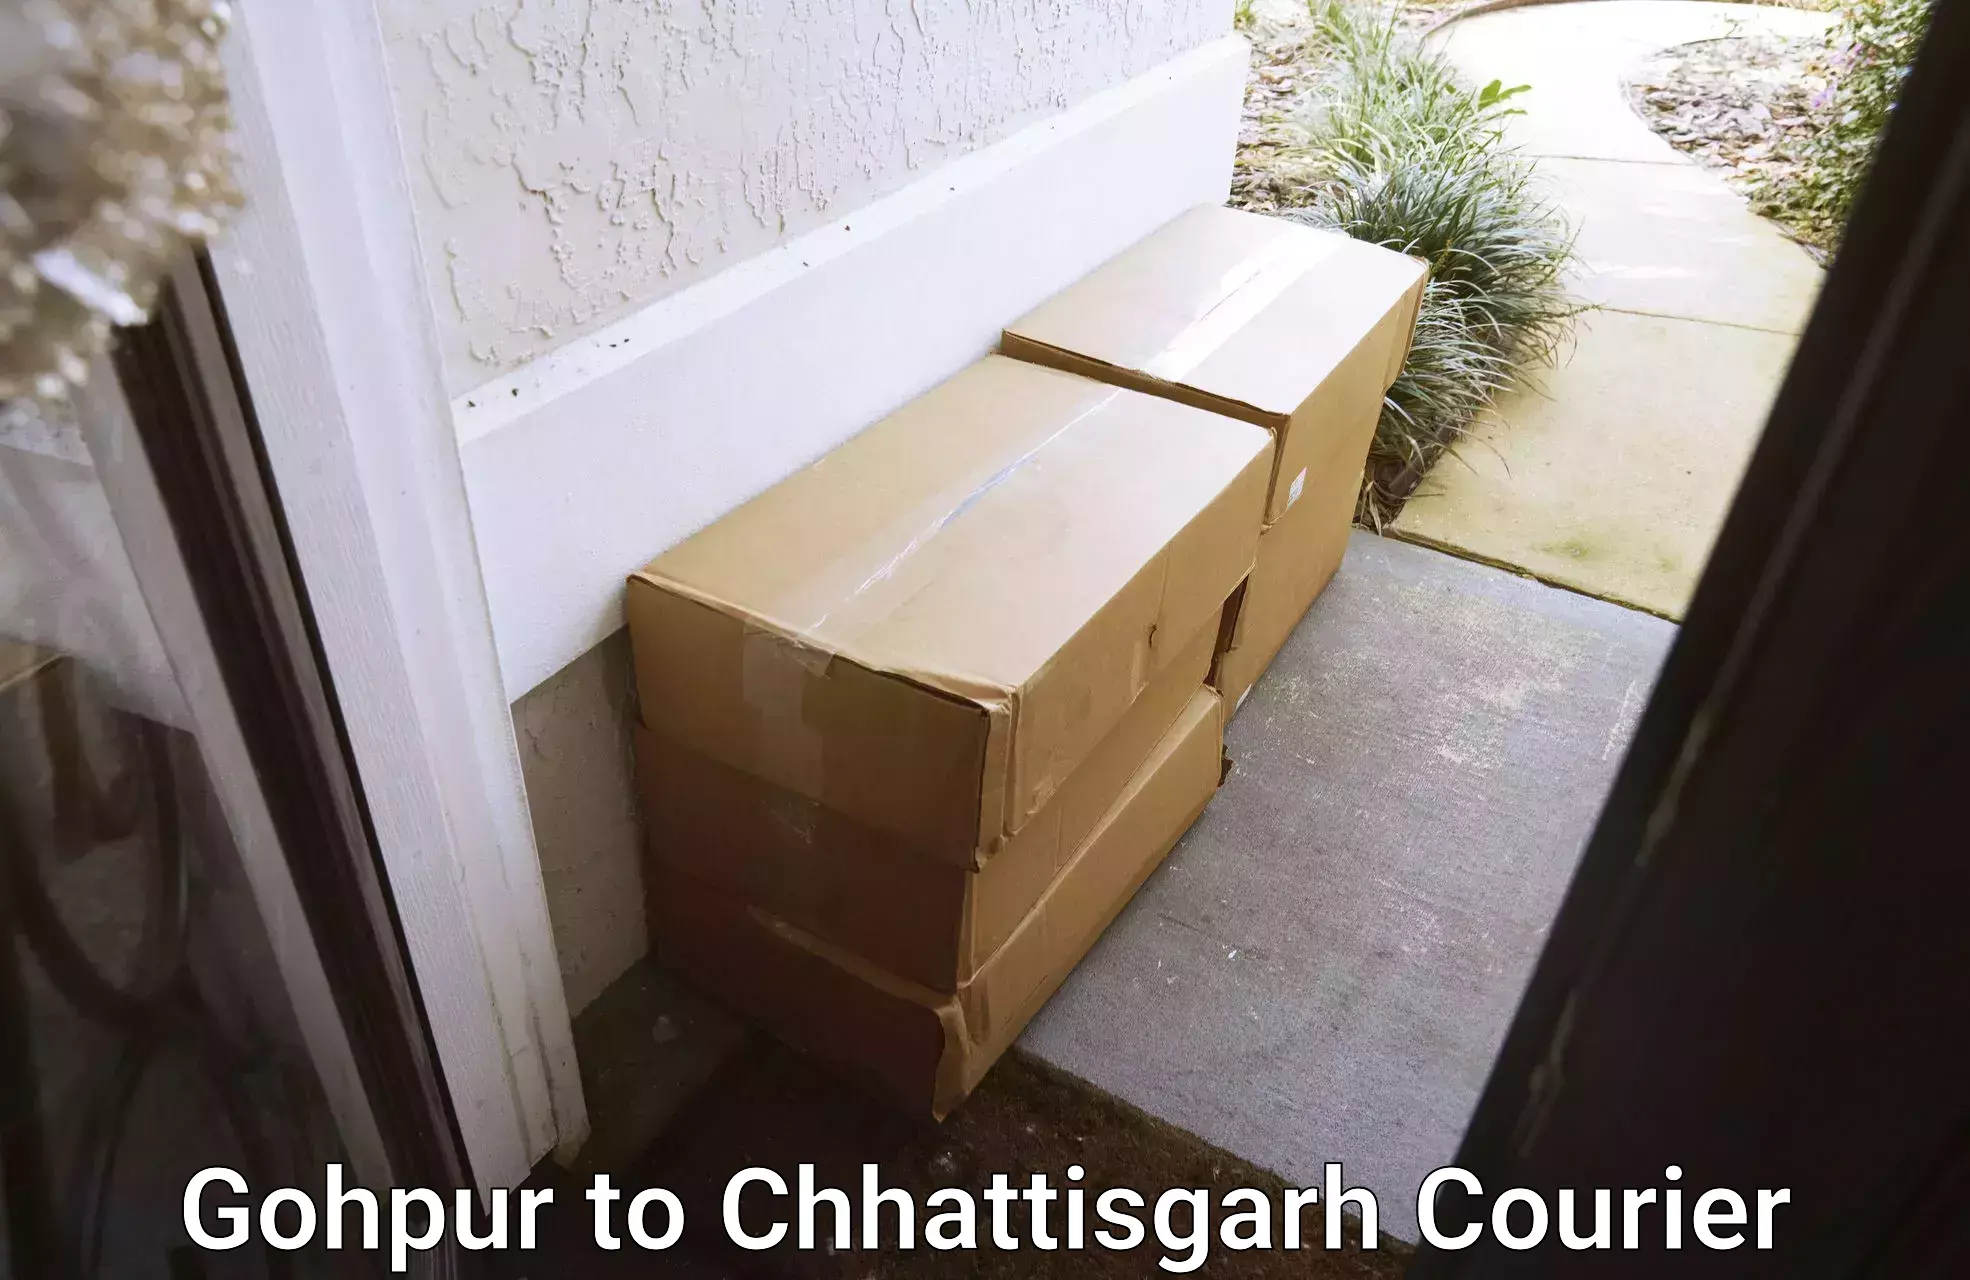 Express courier capabilities in Gohpur to Chhattisgarh